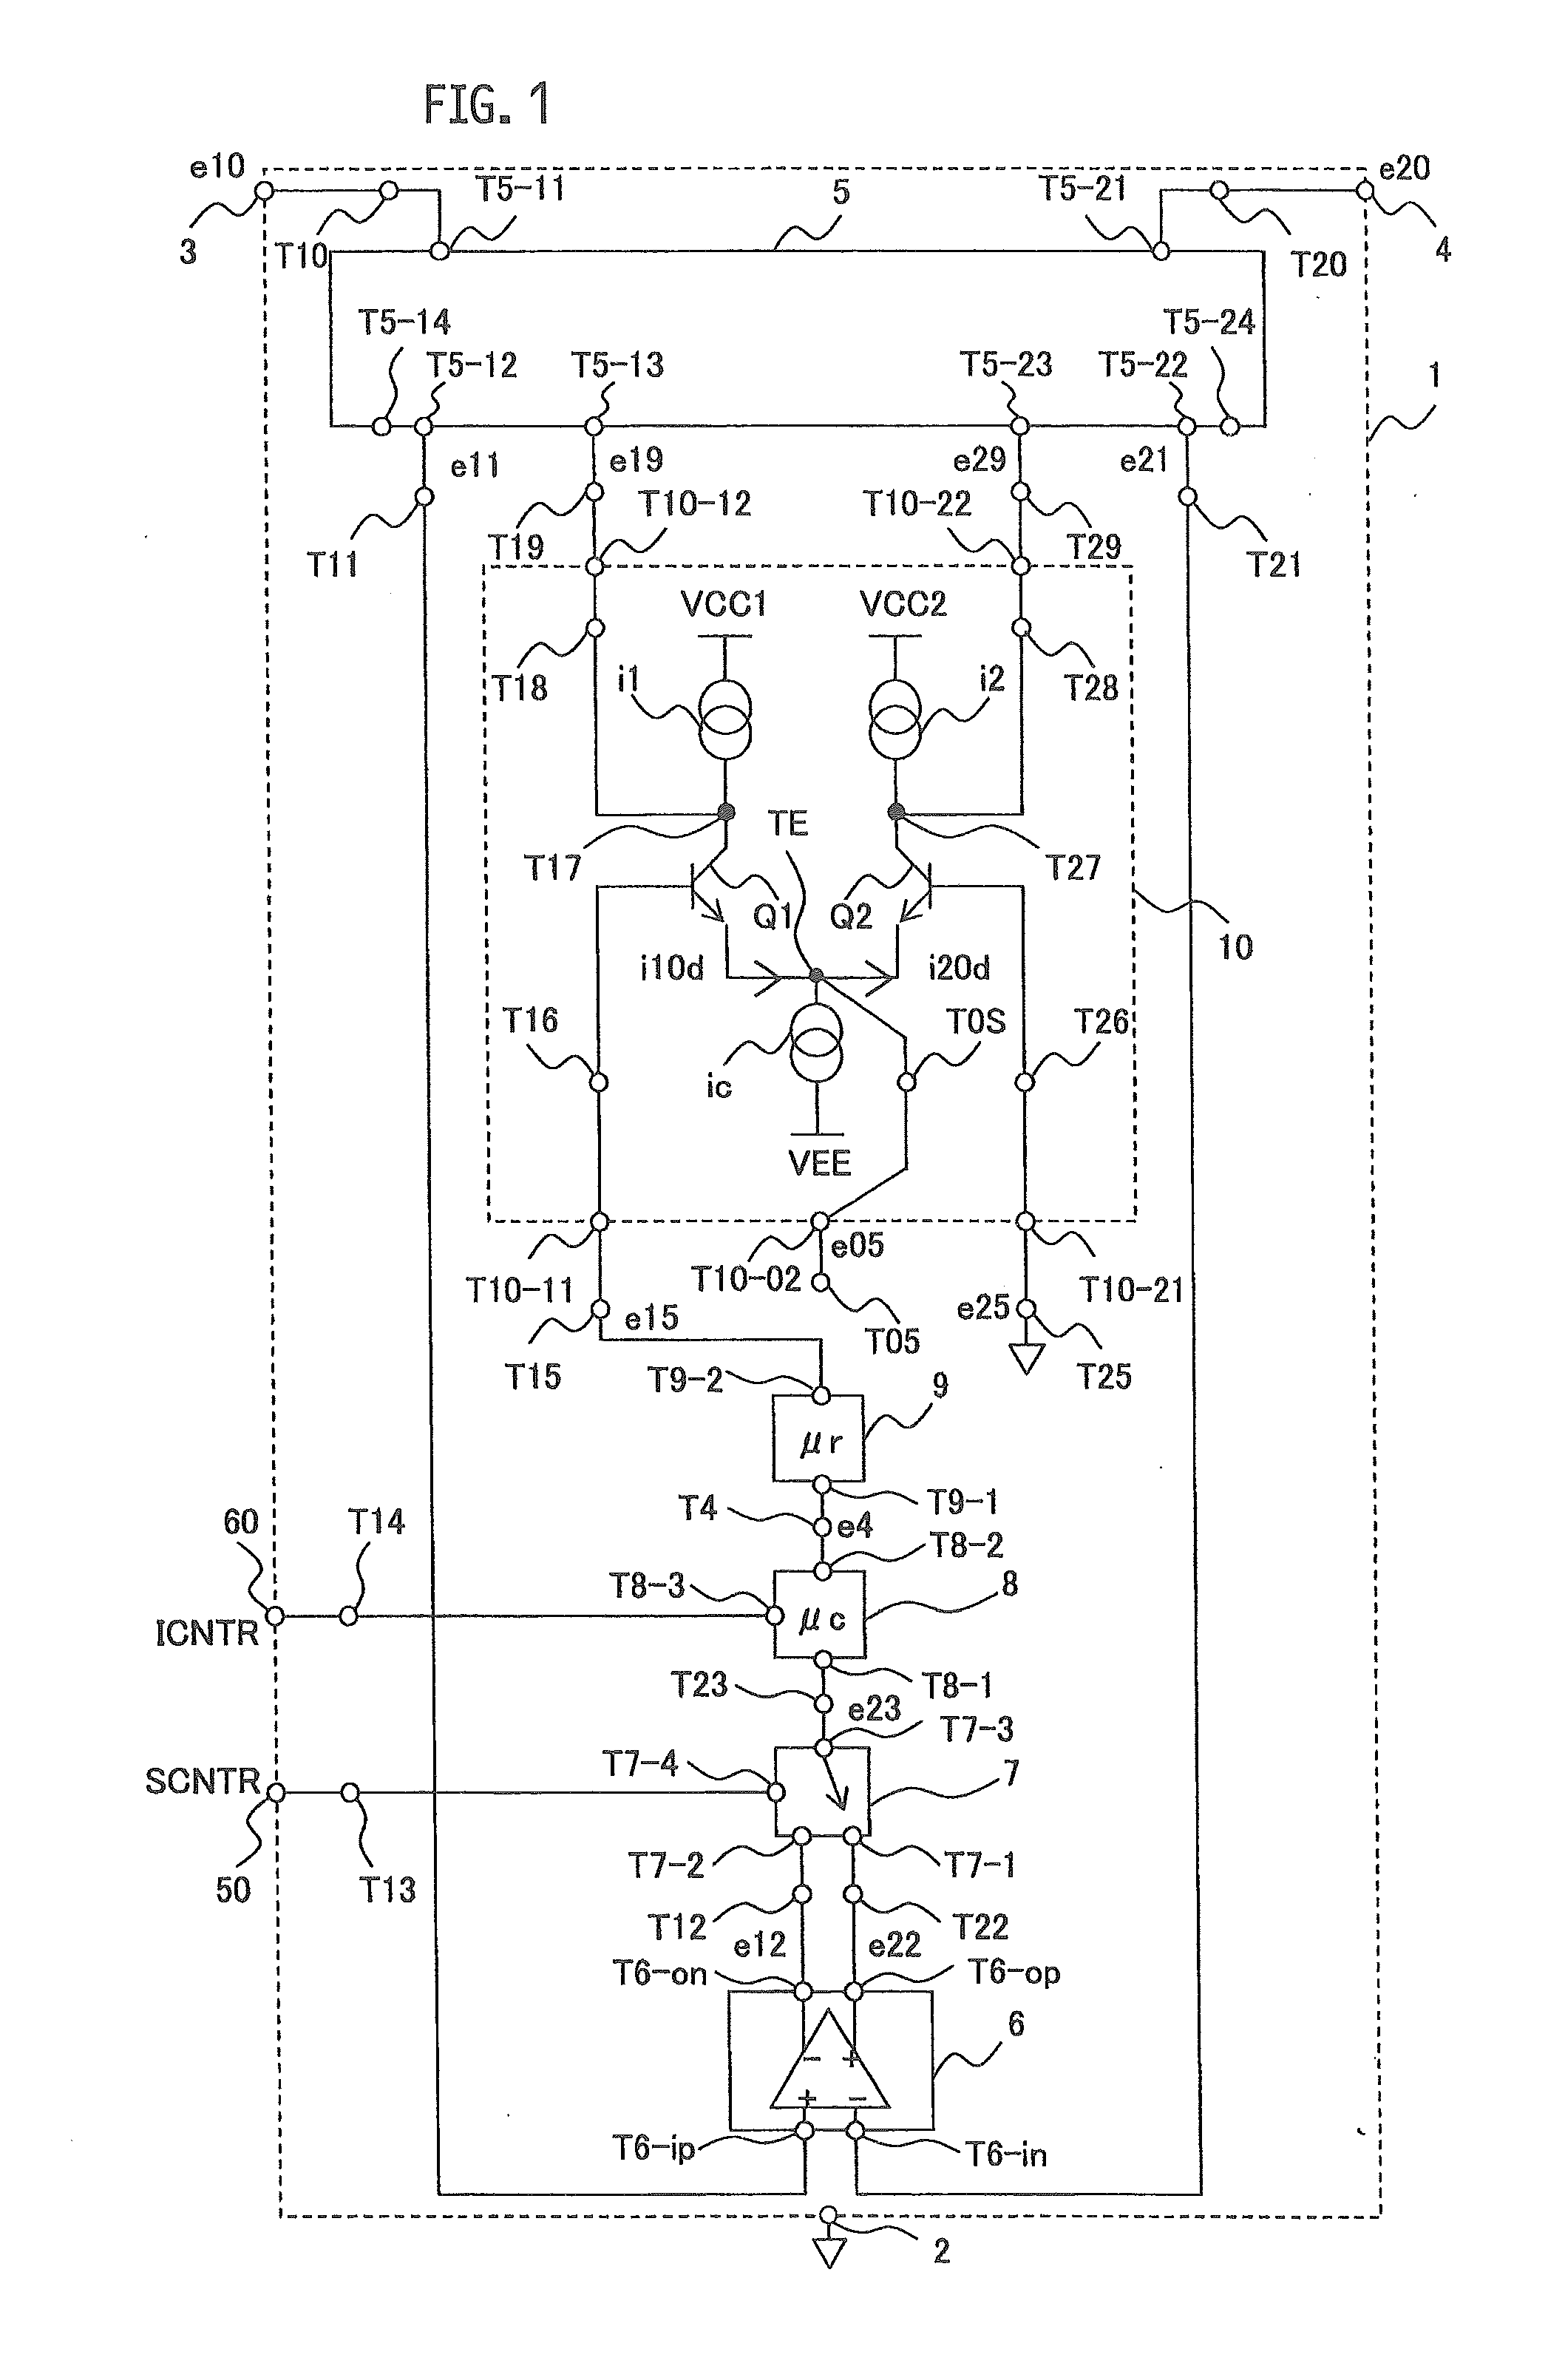 Immittance conversion circuit and filter